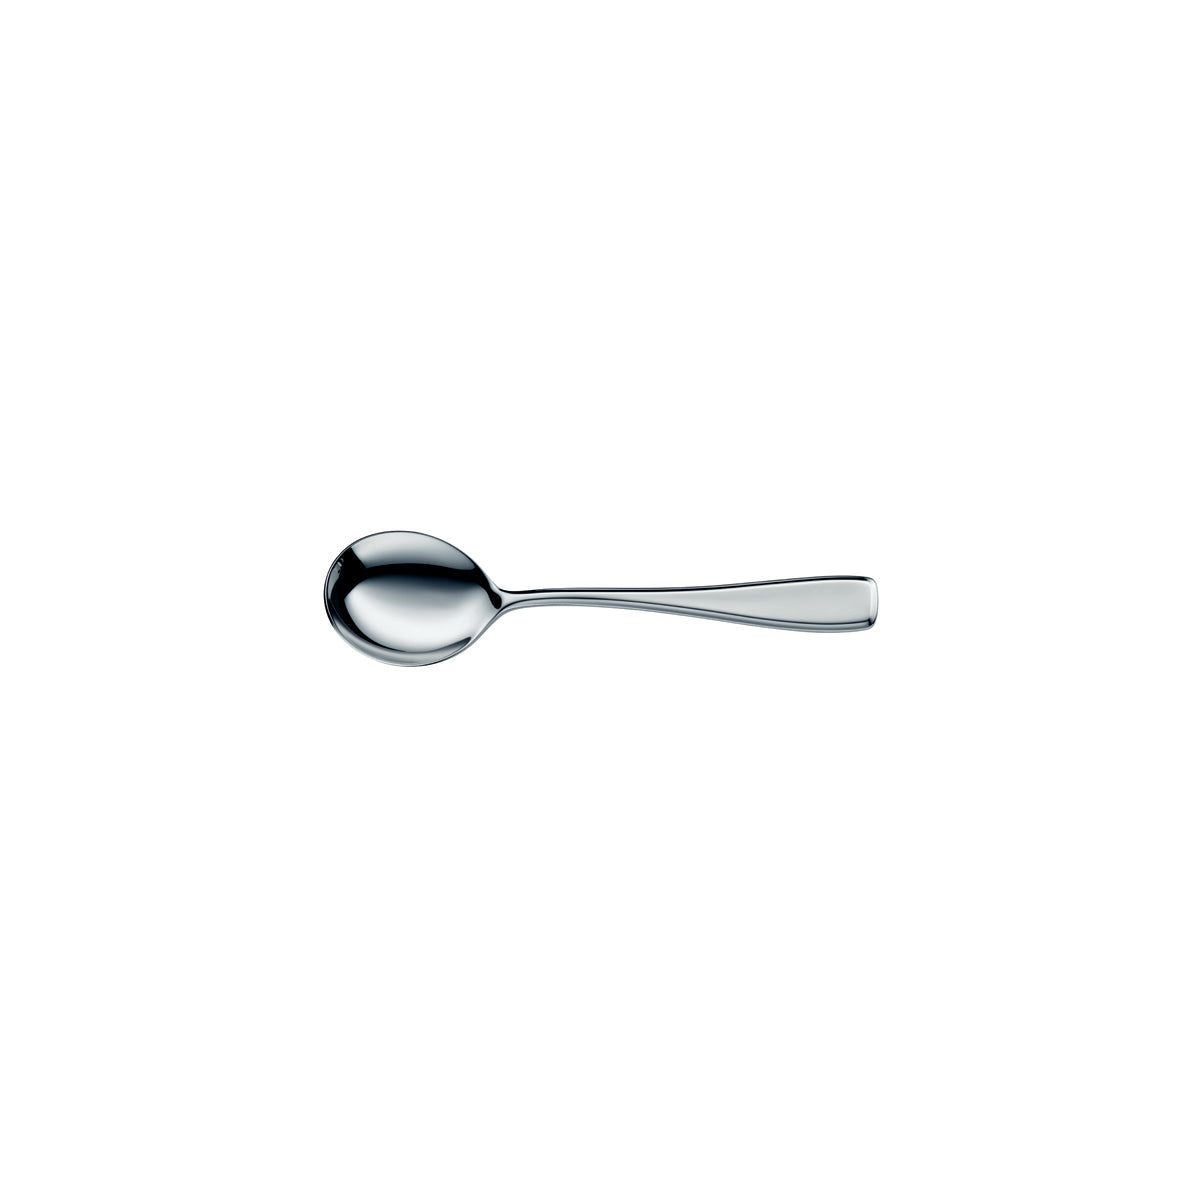 10.7989.6060 WMF Solid Soup Spoon Silverplated Tomkin Australia Hospitality Supplies